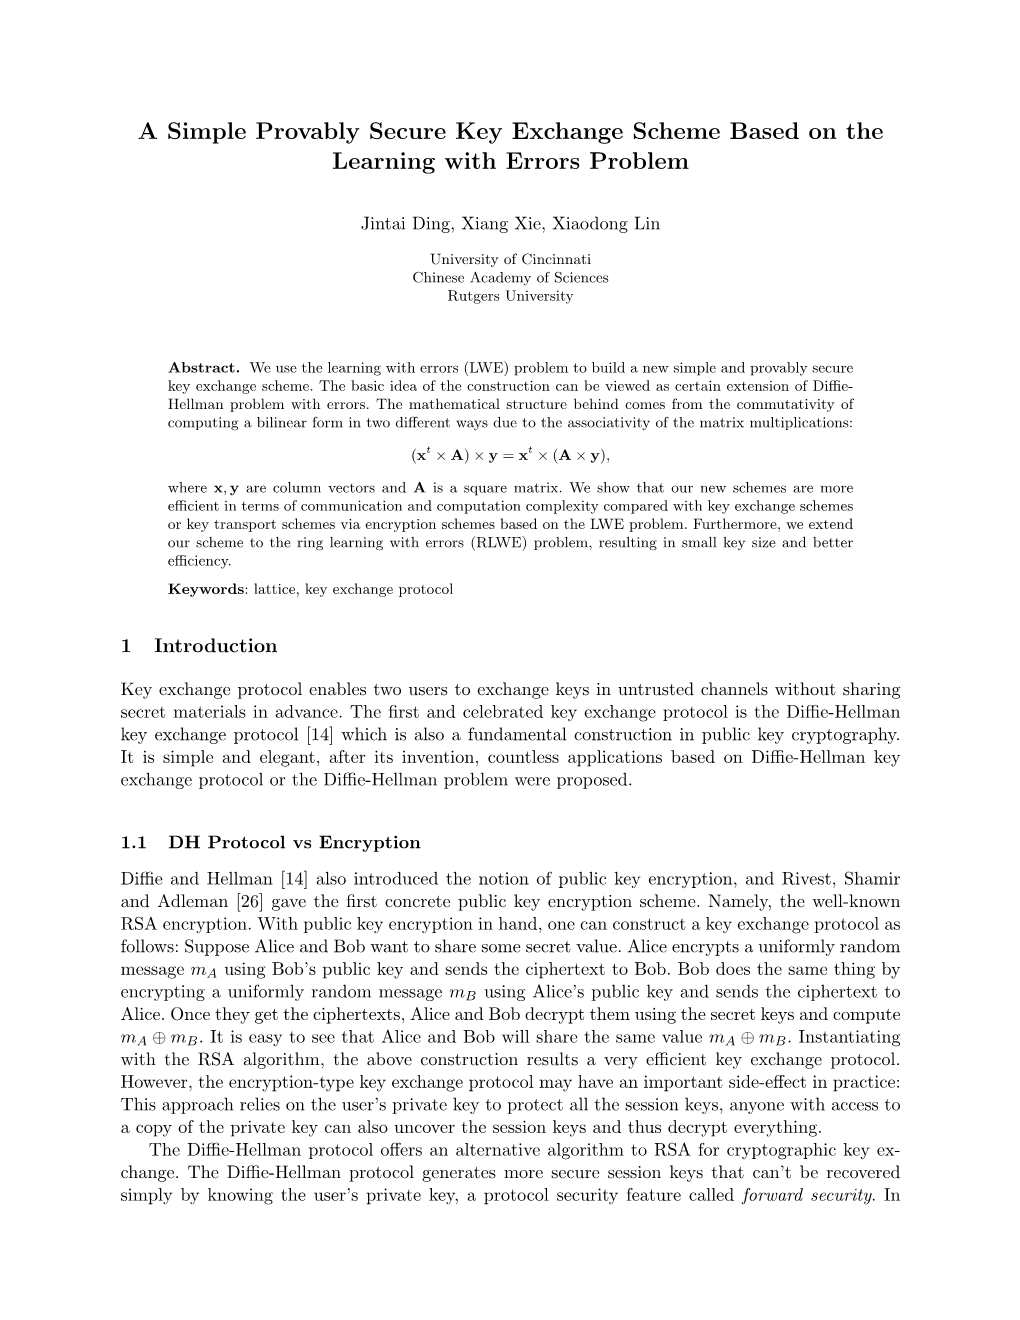 A Simple Provably Secure Key Exchange Scheme Based on the Learning with Errors Problem